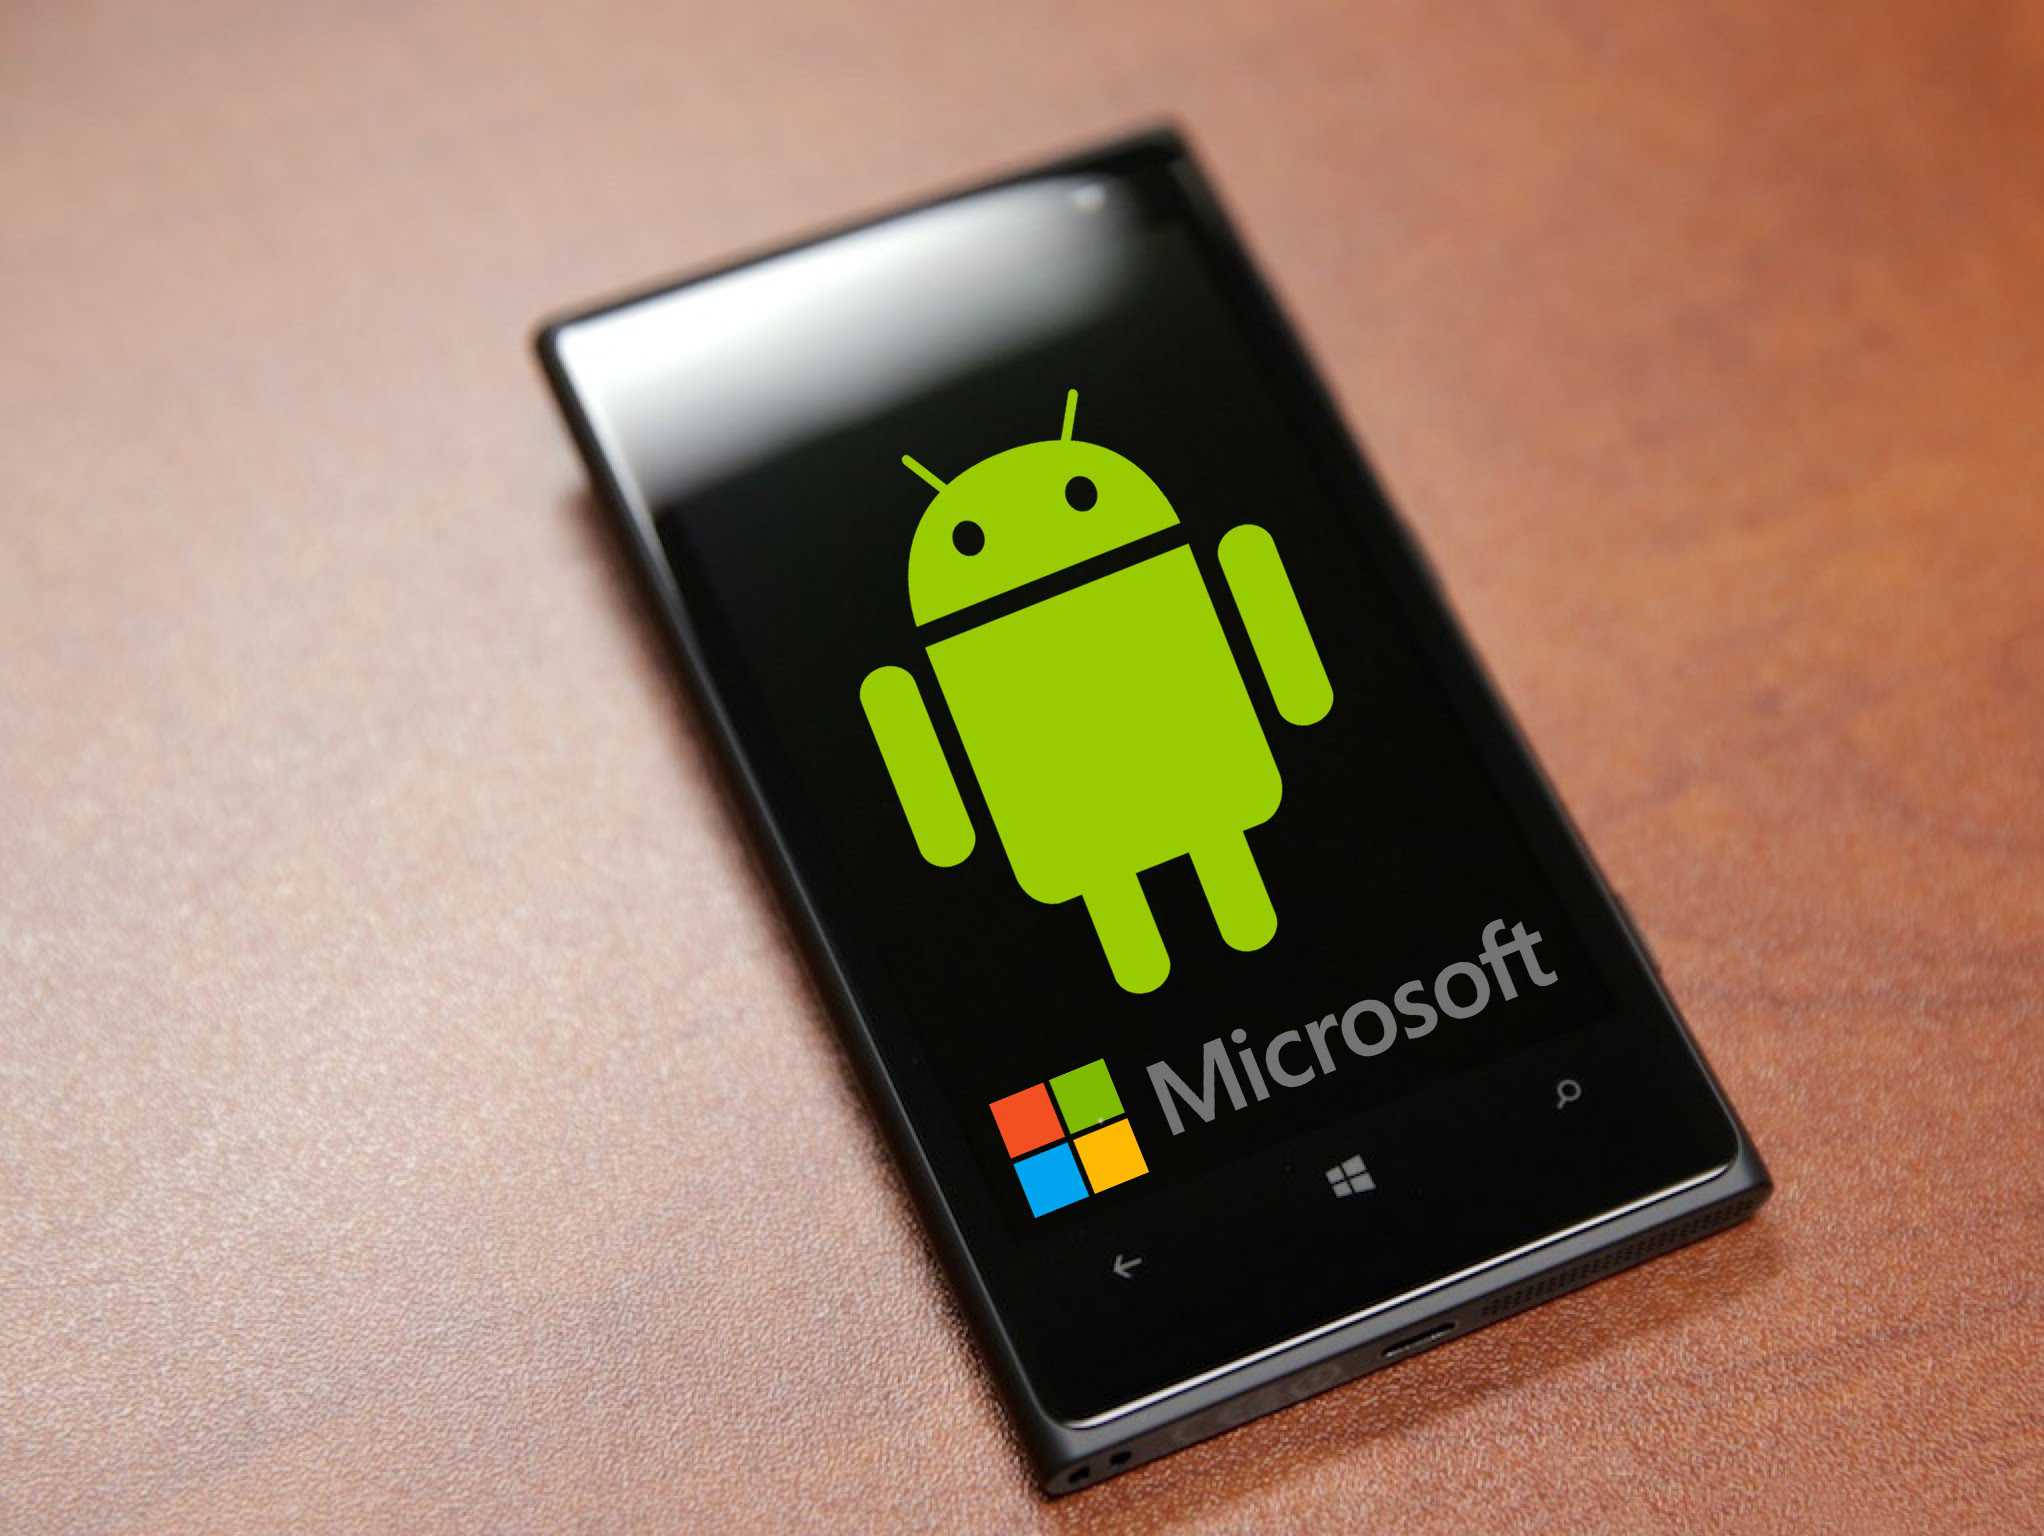 How to Install and Android App on a Windows phone